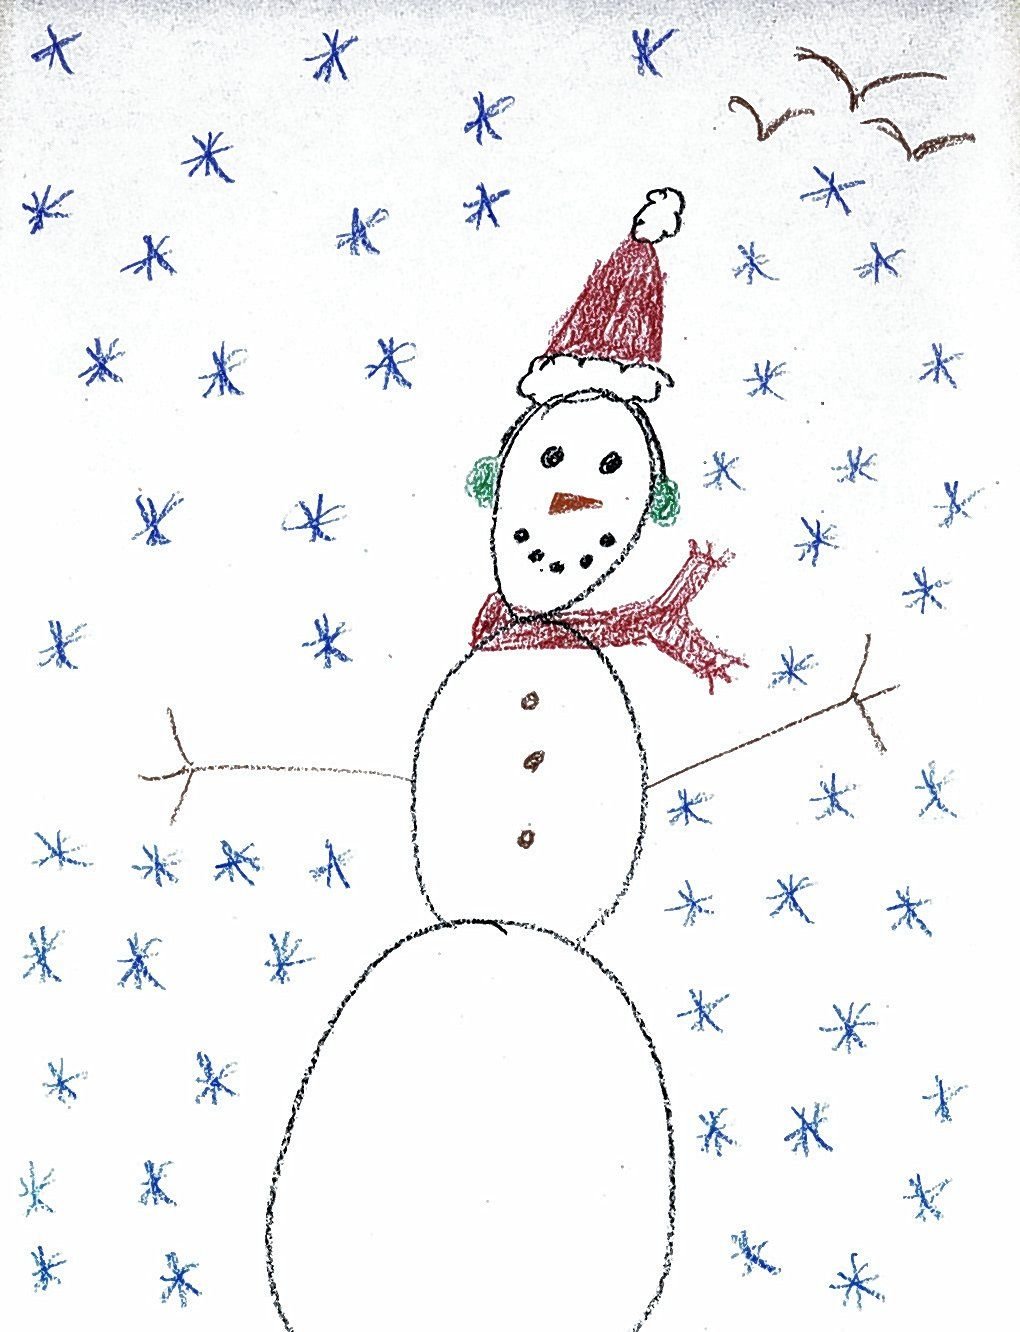 Hey kids, send us your winter drawing and you could win | Local News from the St. Charles Suburban Journals | stltoday.com